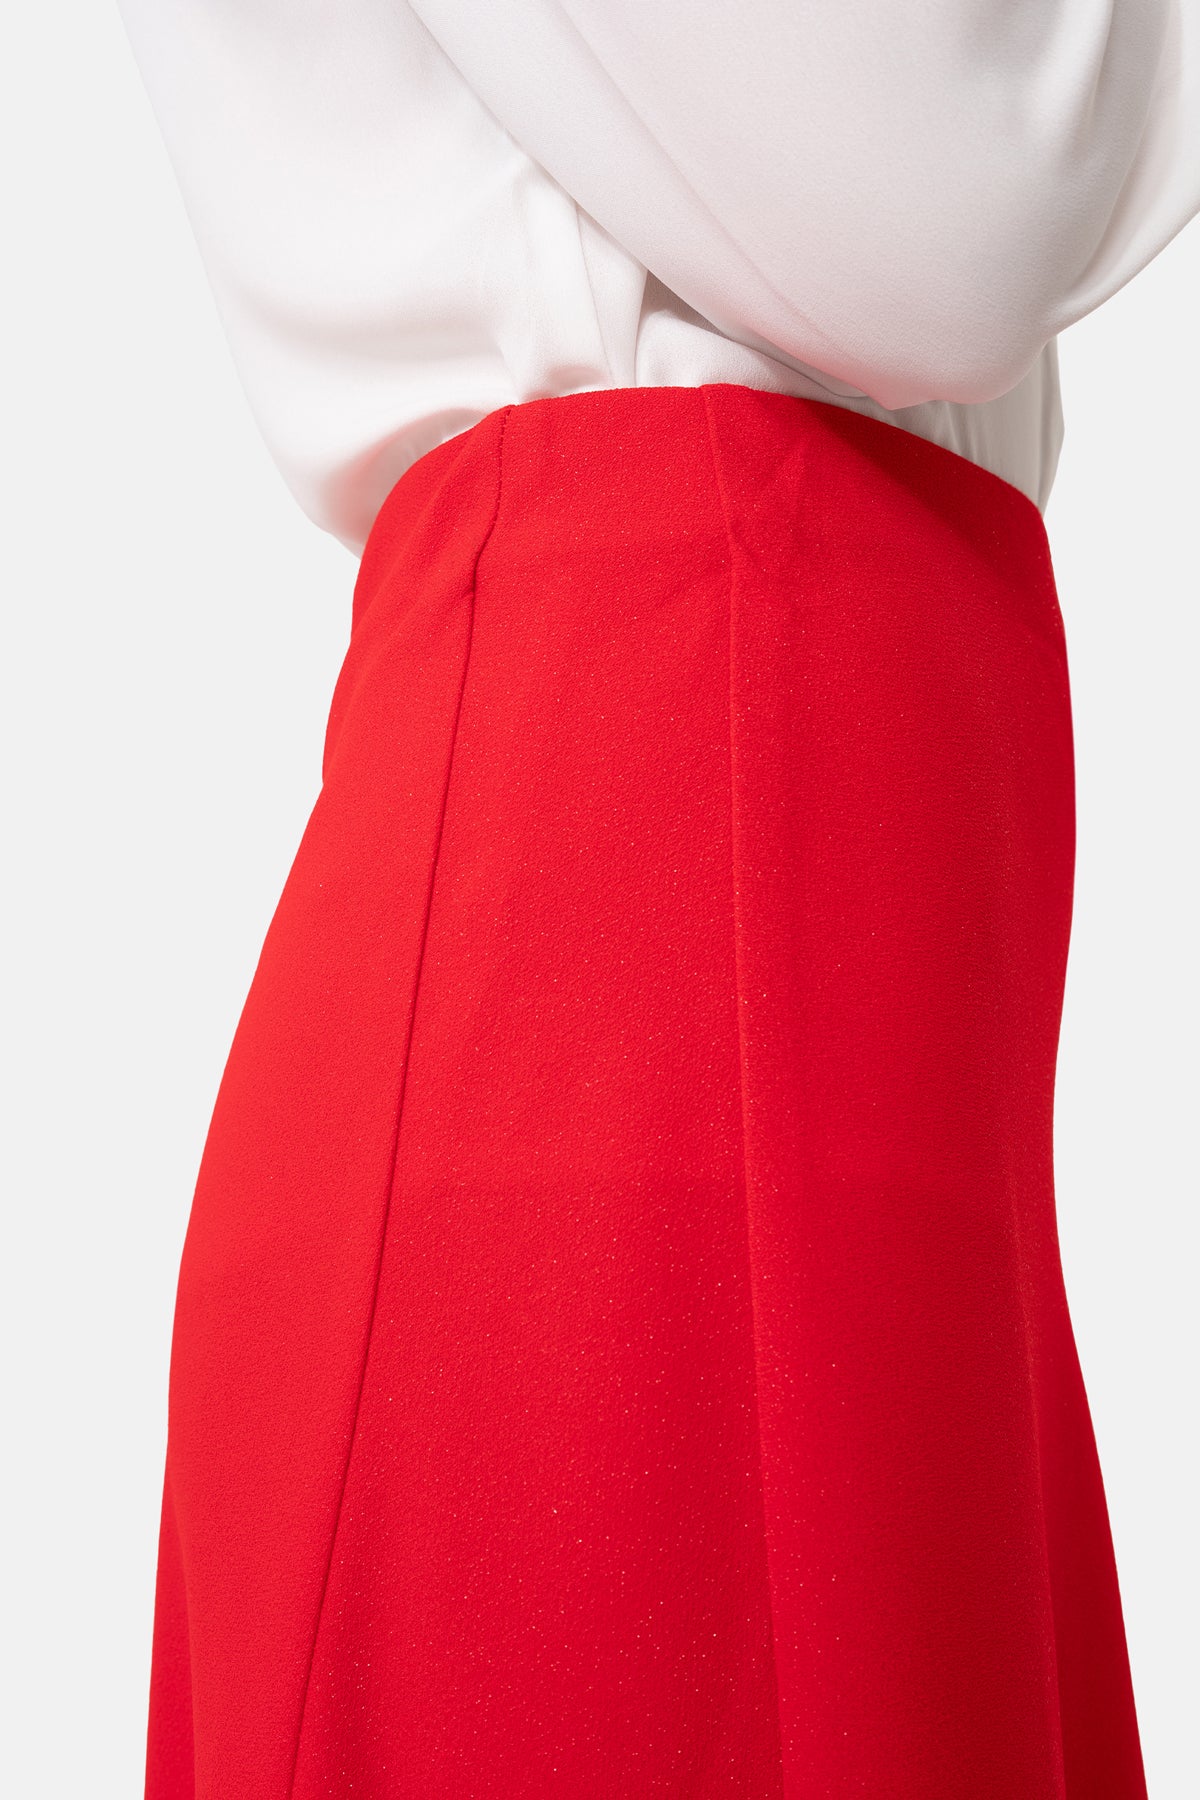 Red Color Flared Women's Skirt with Elastic Waist